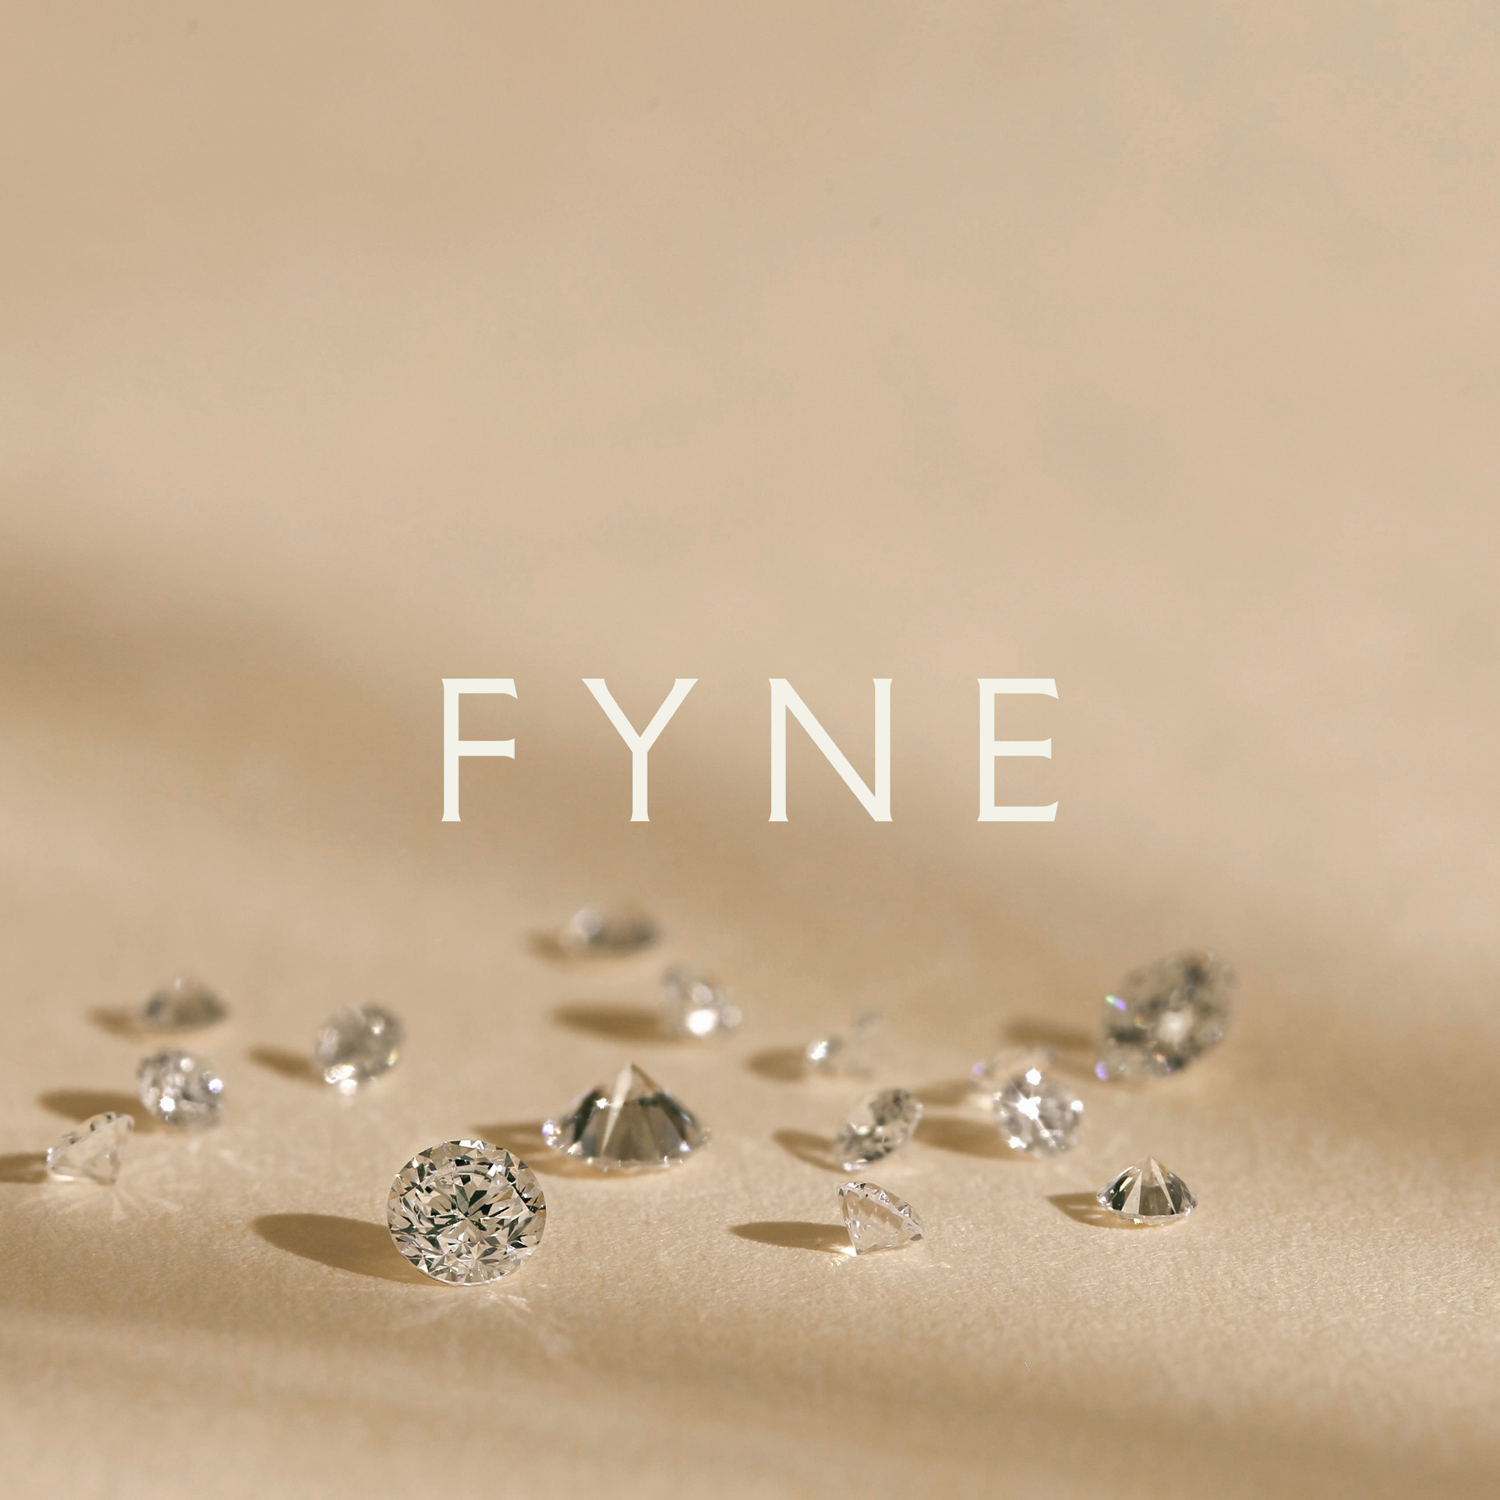 Fyne Chats: Rebranding for the Future